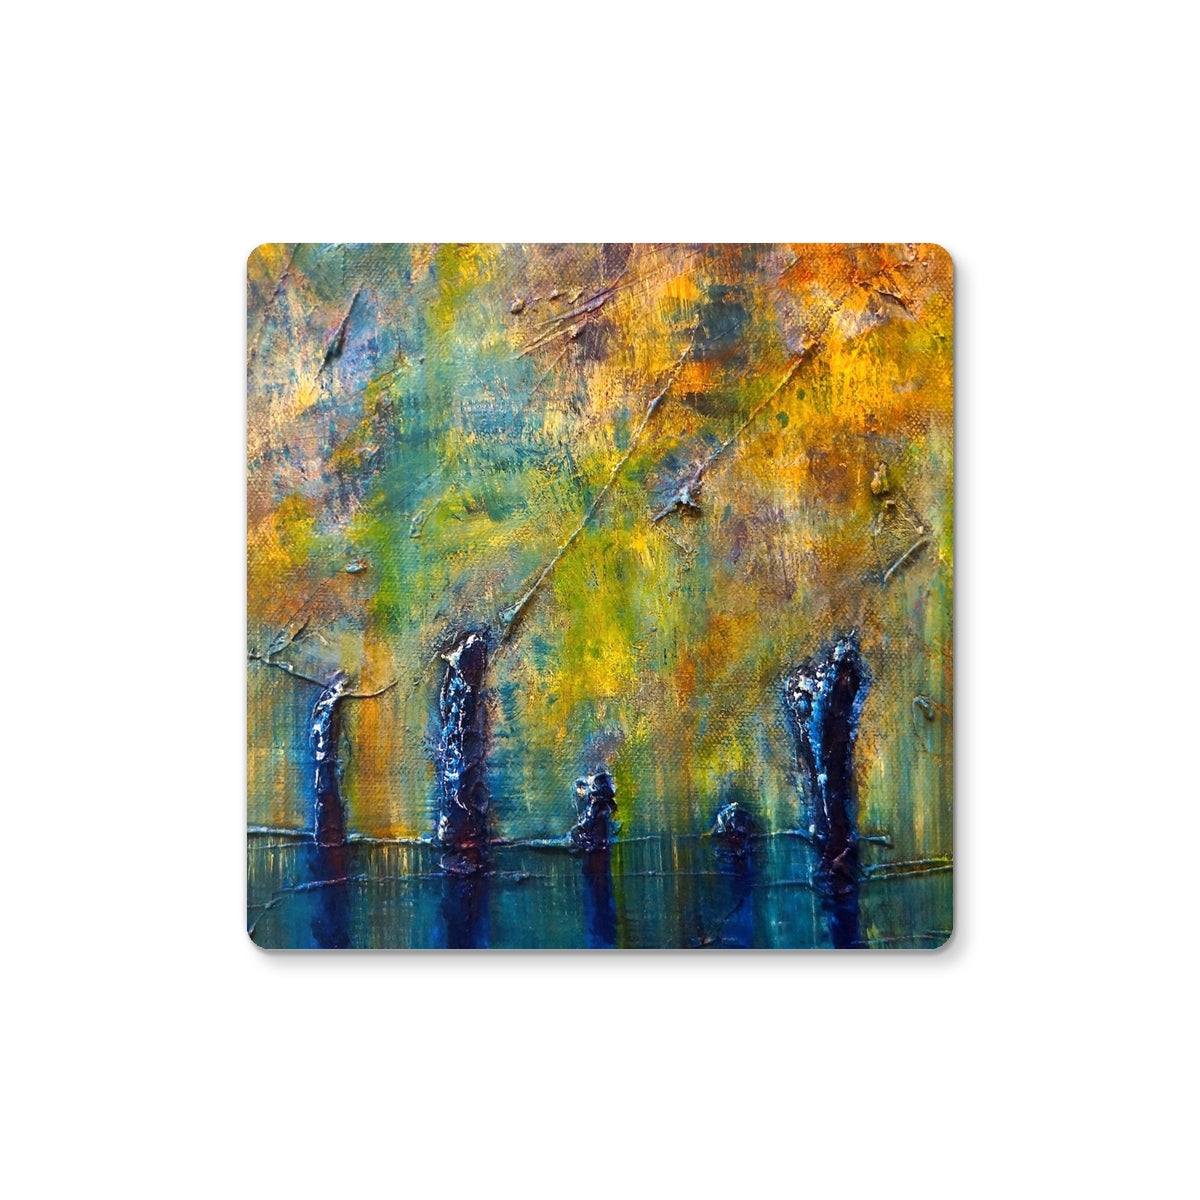 Stenness Moonlight Orkney Art Gifts Coaster-Coasters-Orkney Art Gallery-2 Coasters-Paintings, Prints, Homeware, Art Gifts From Scotland By Scottish Artist Kevin Hunter